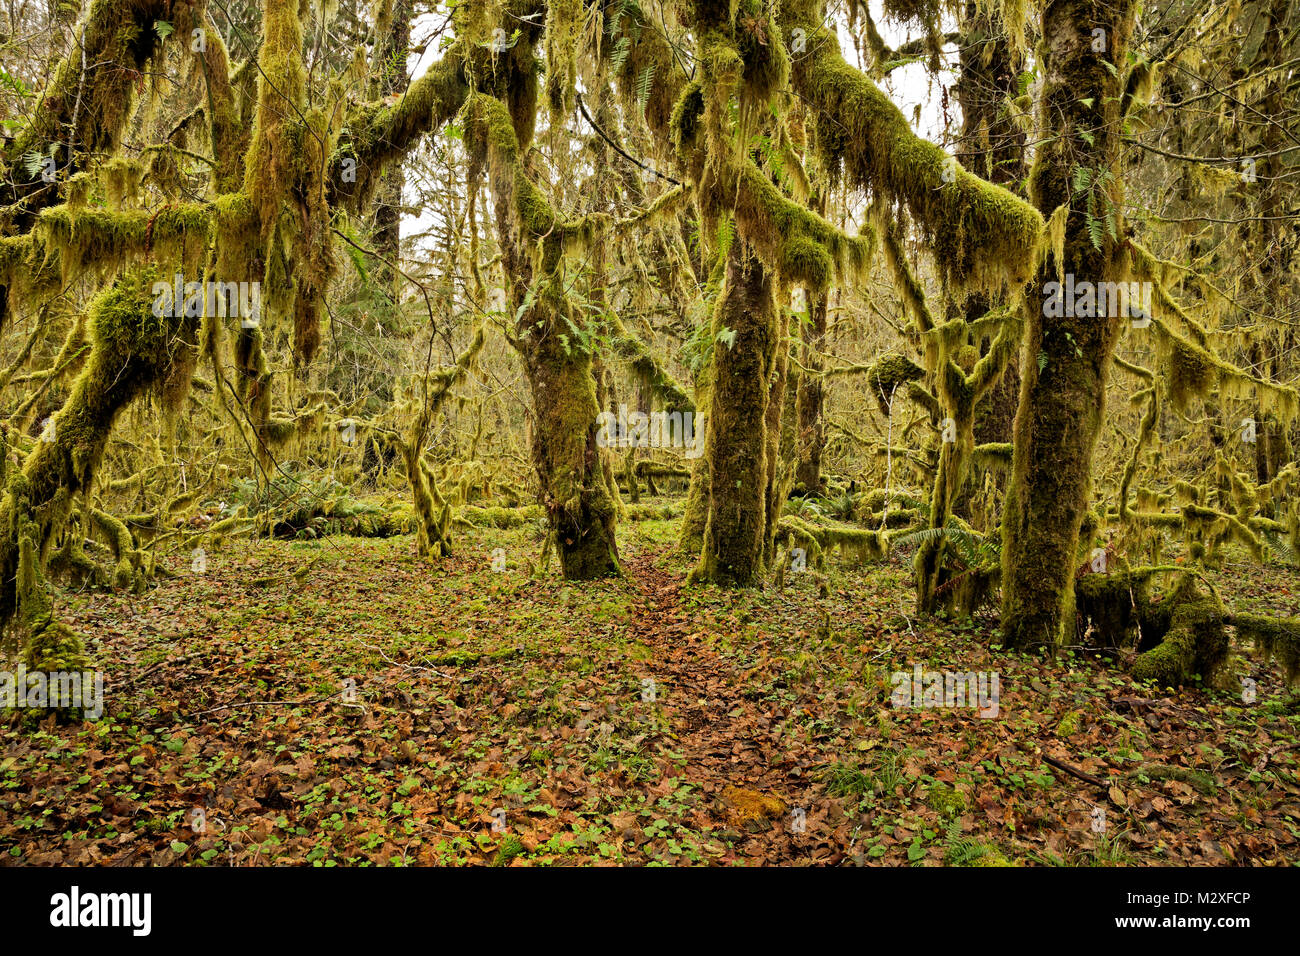 WA13289-00...WASHINGTON - Moss covered trees along Sams River Trail in the Queets Rain Forest of Olympic National Park. Stock Photo